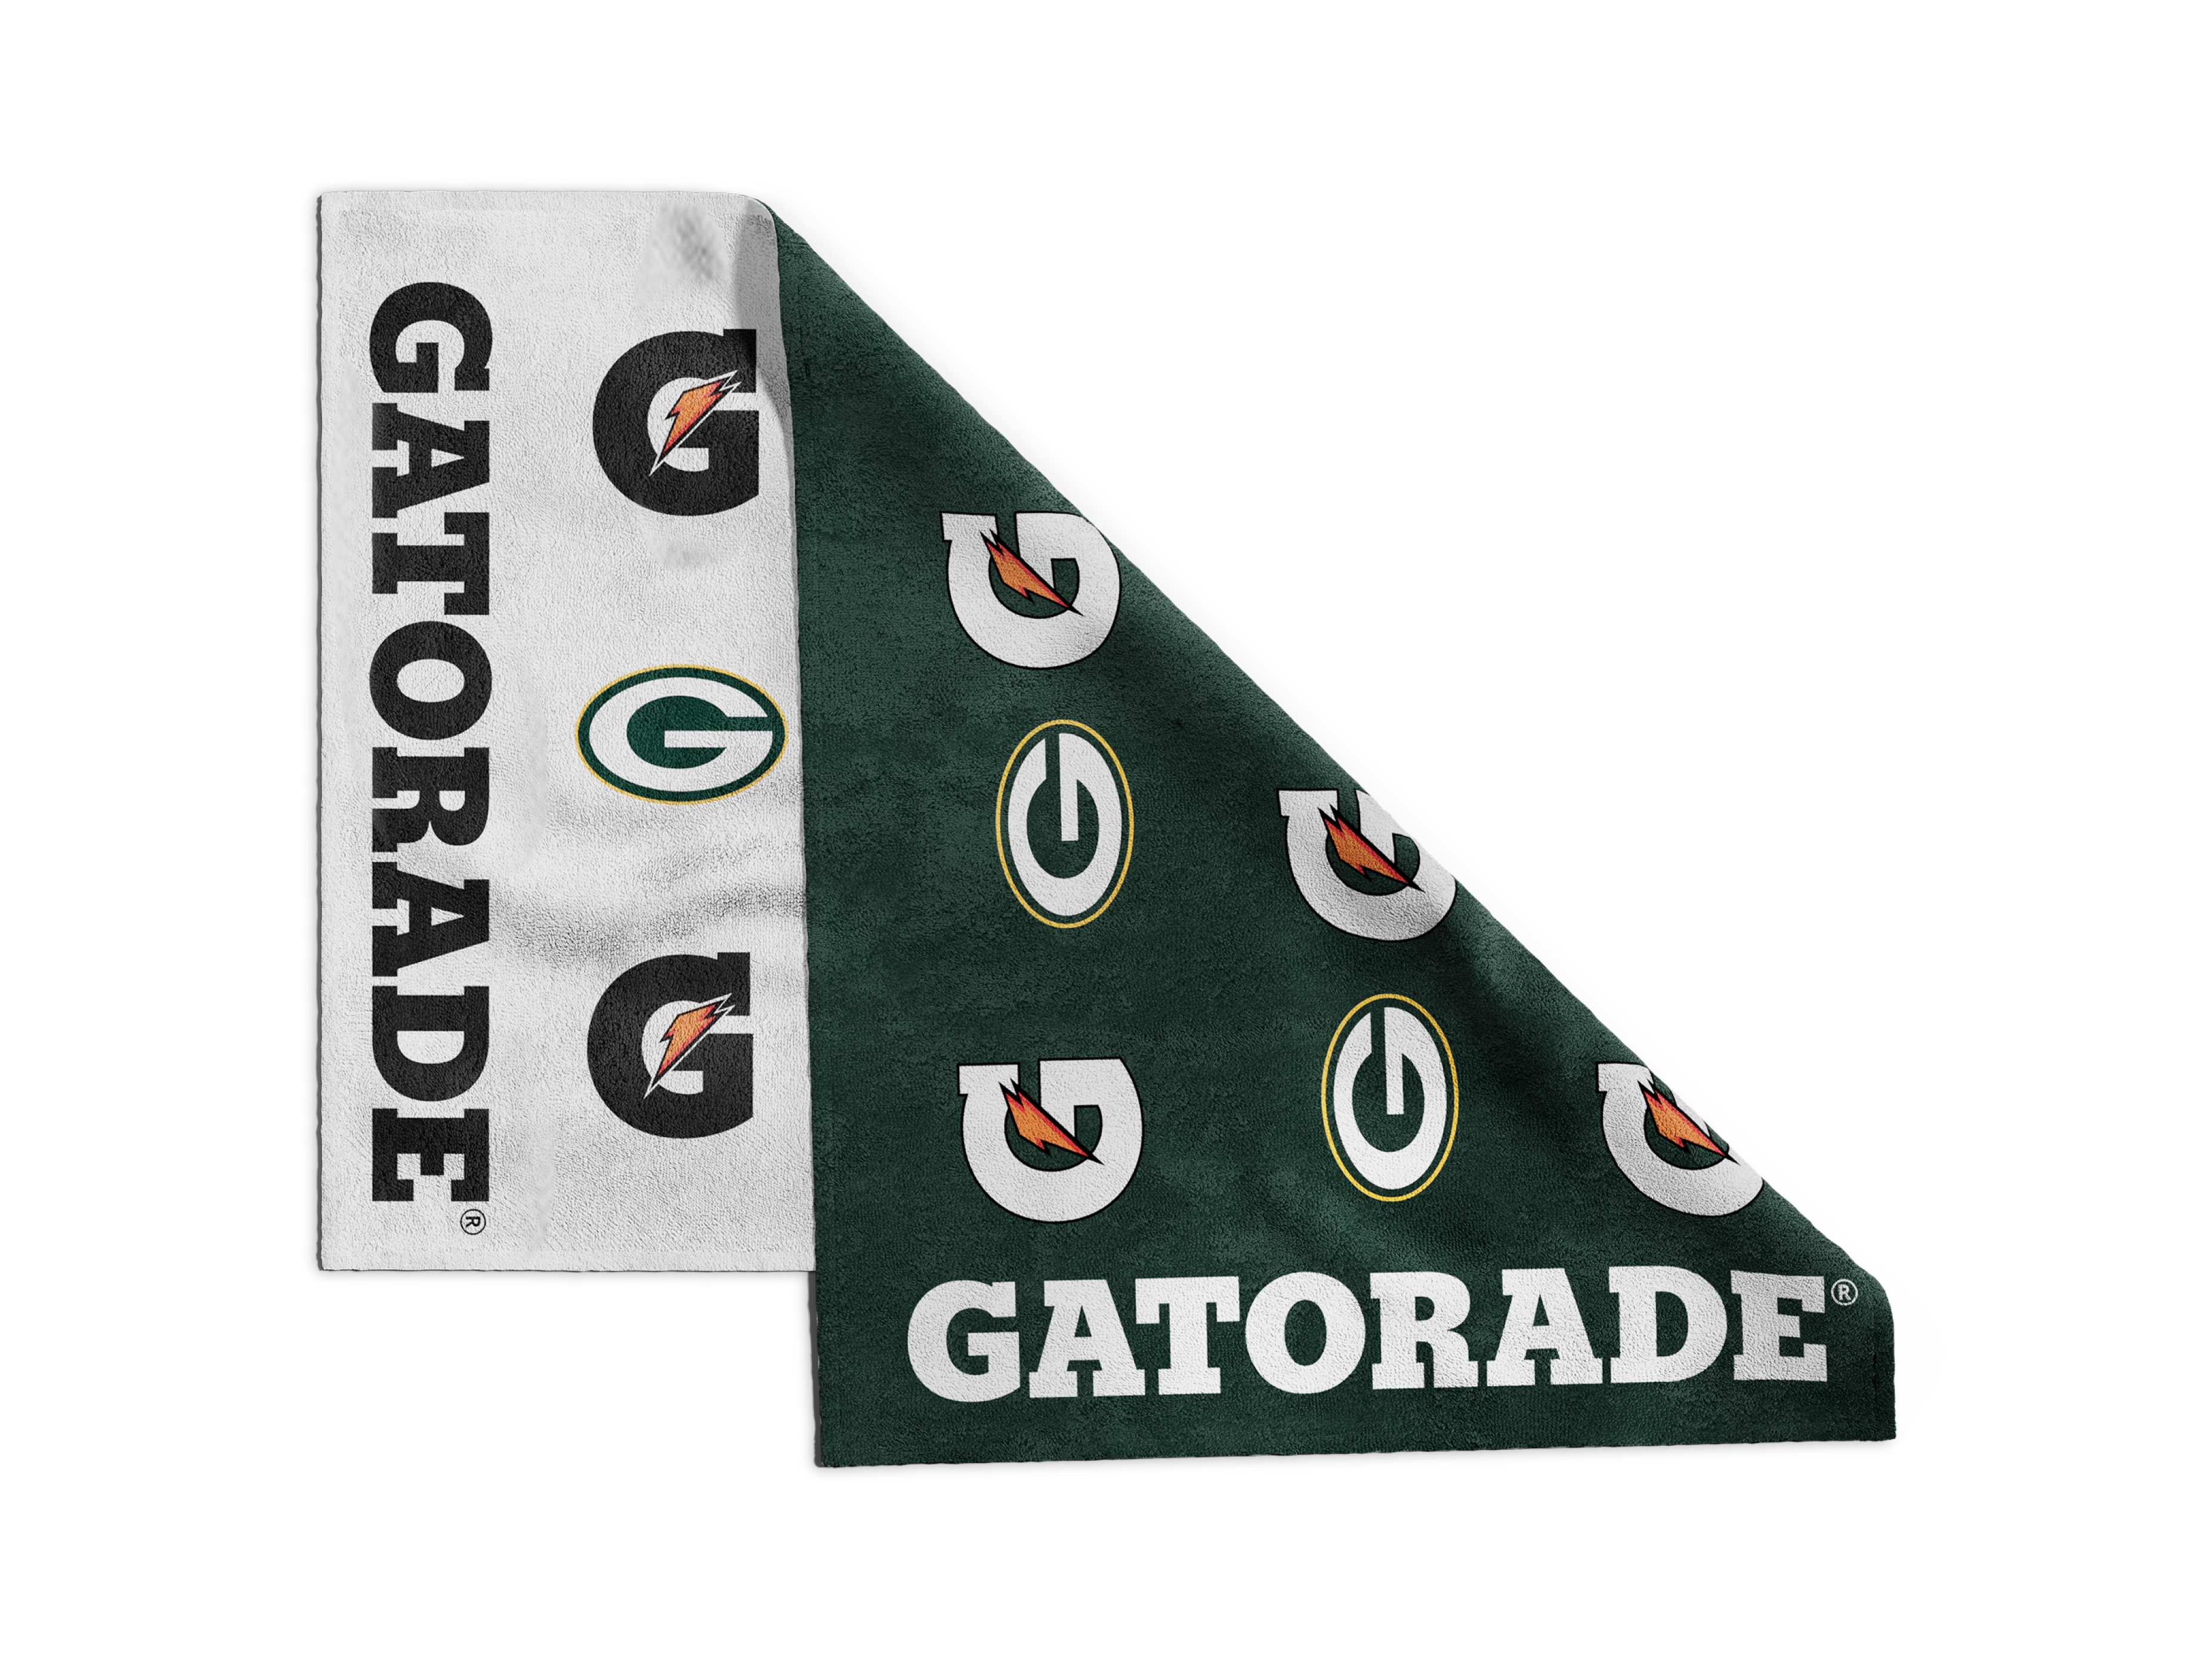 Green Bay Packers Pro Towel